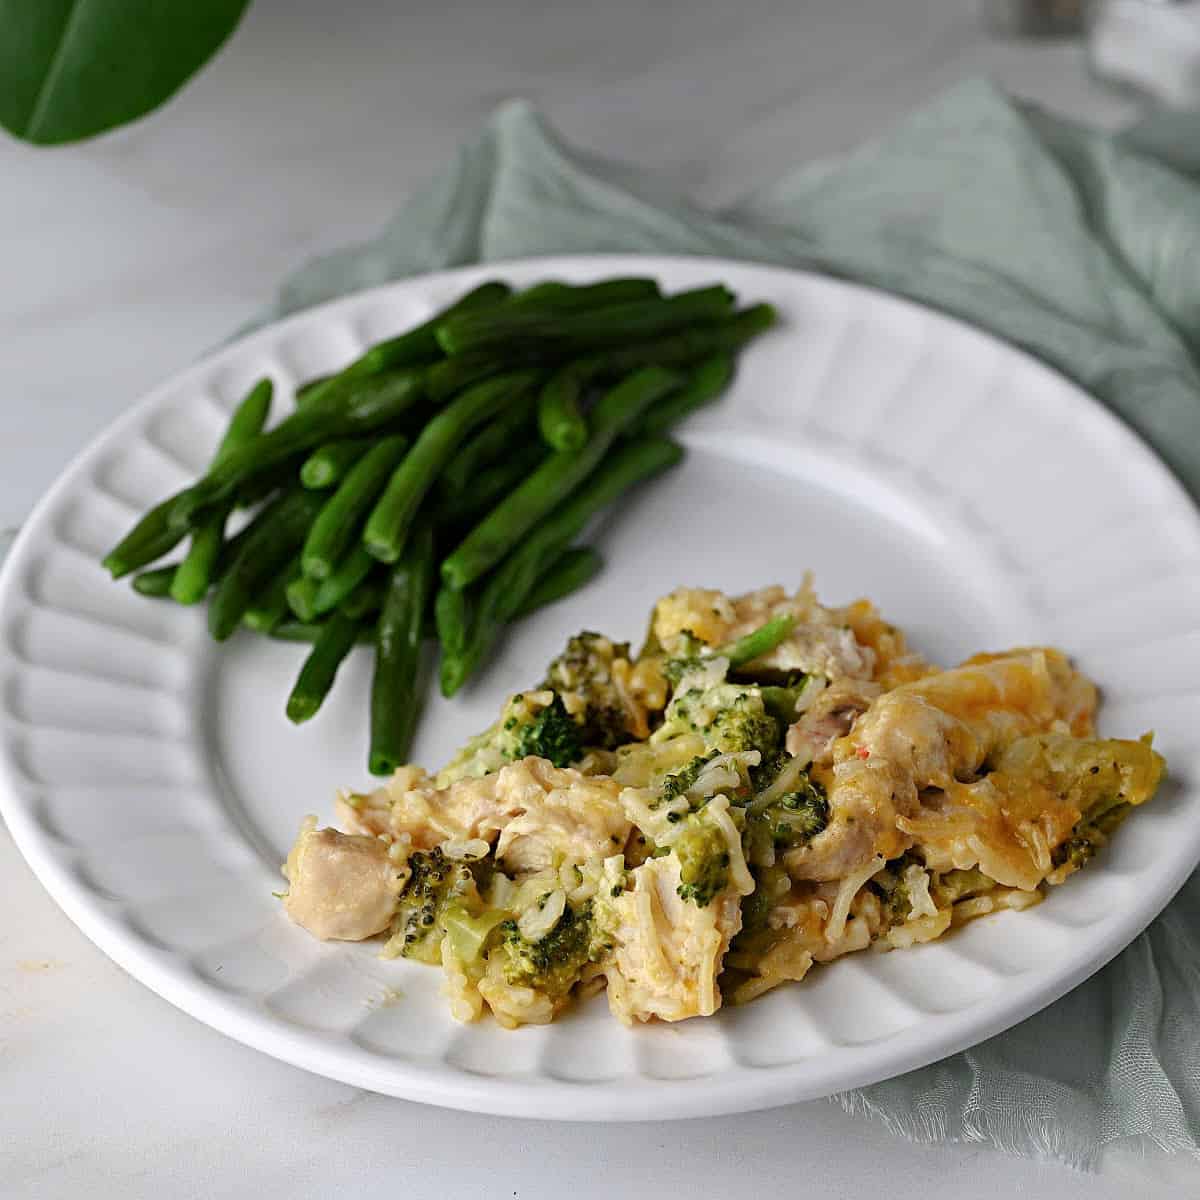 Chicken Broccoli Casserole with Knorr Rice